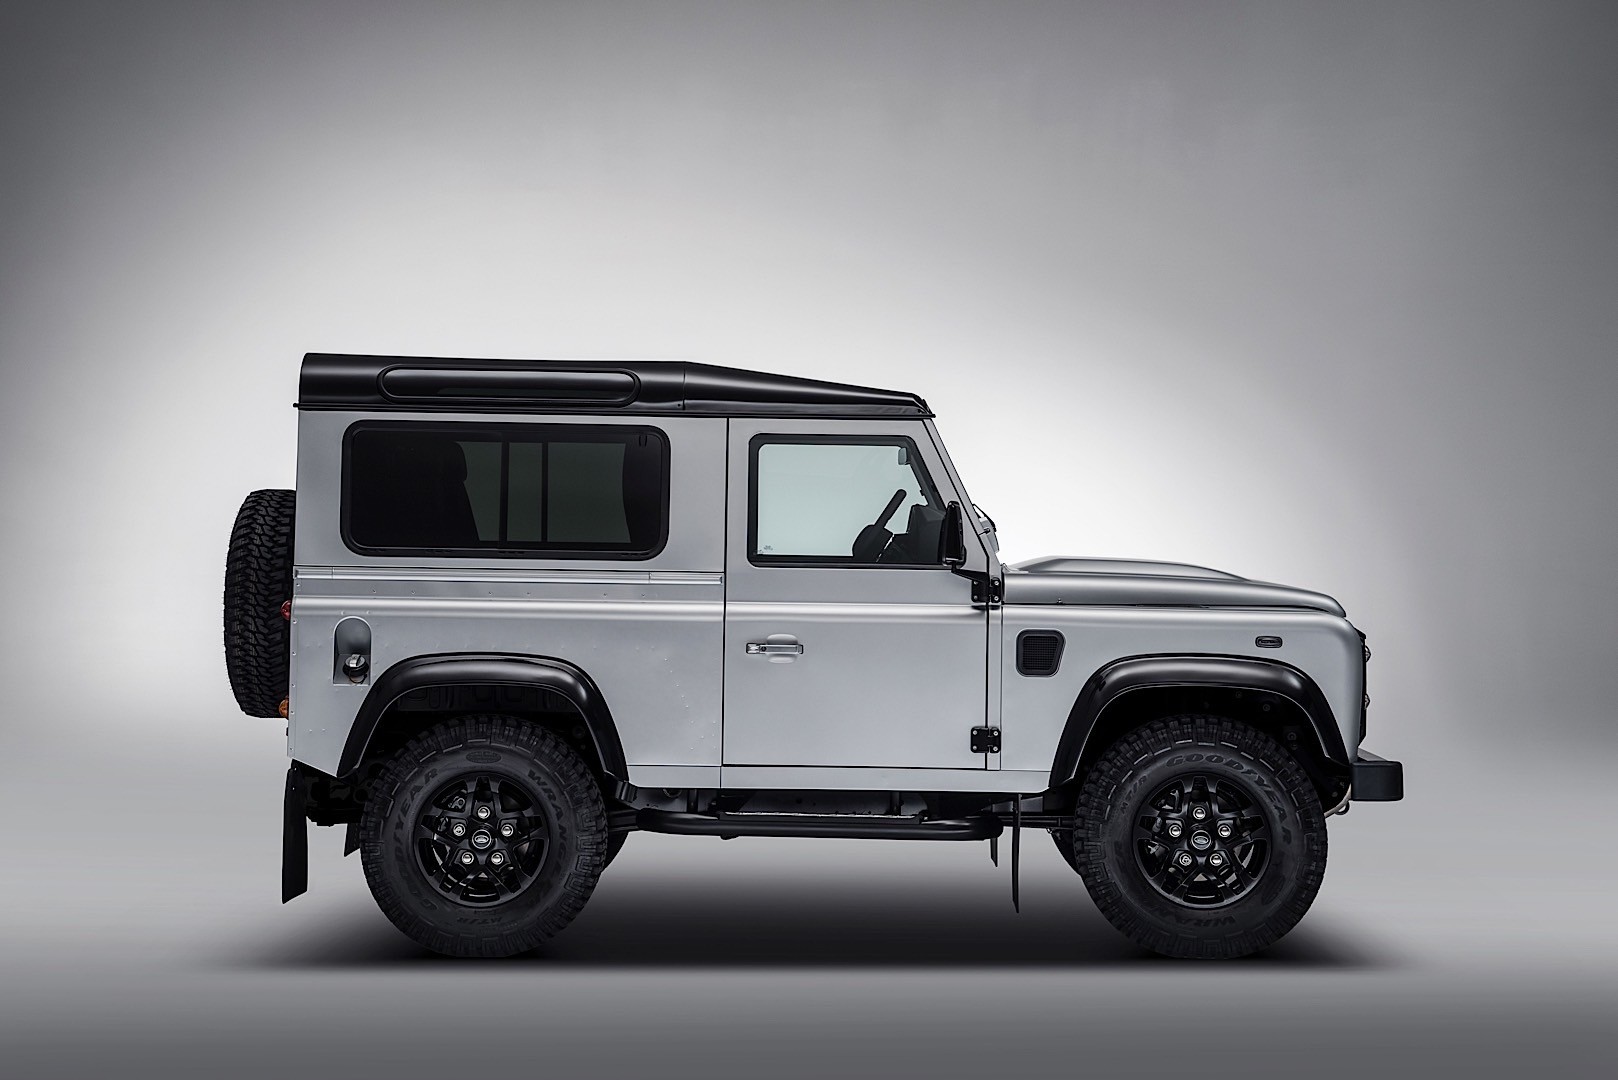 2019 Land Rover Defender Confirmed, Coming with Five Body